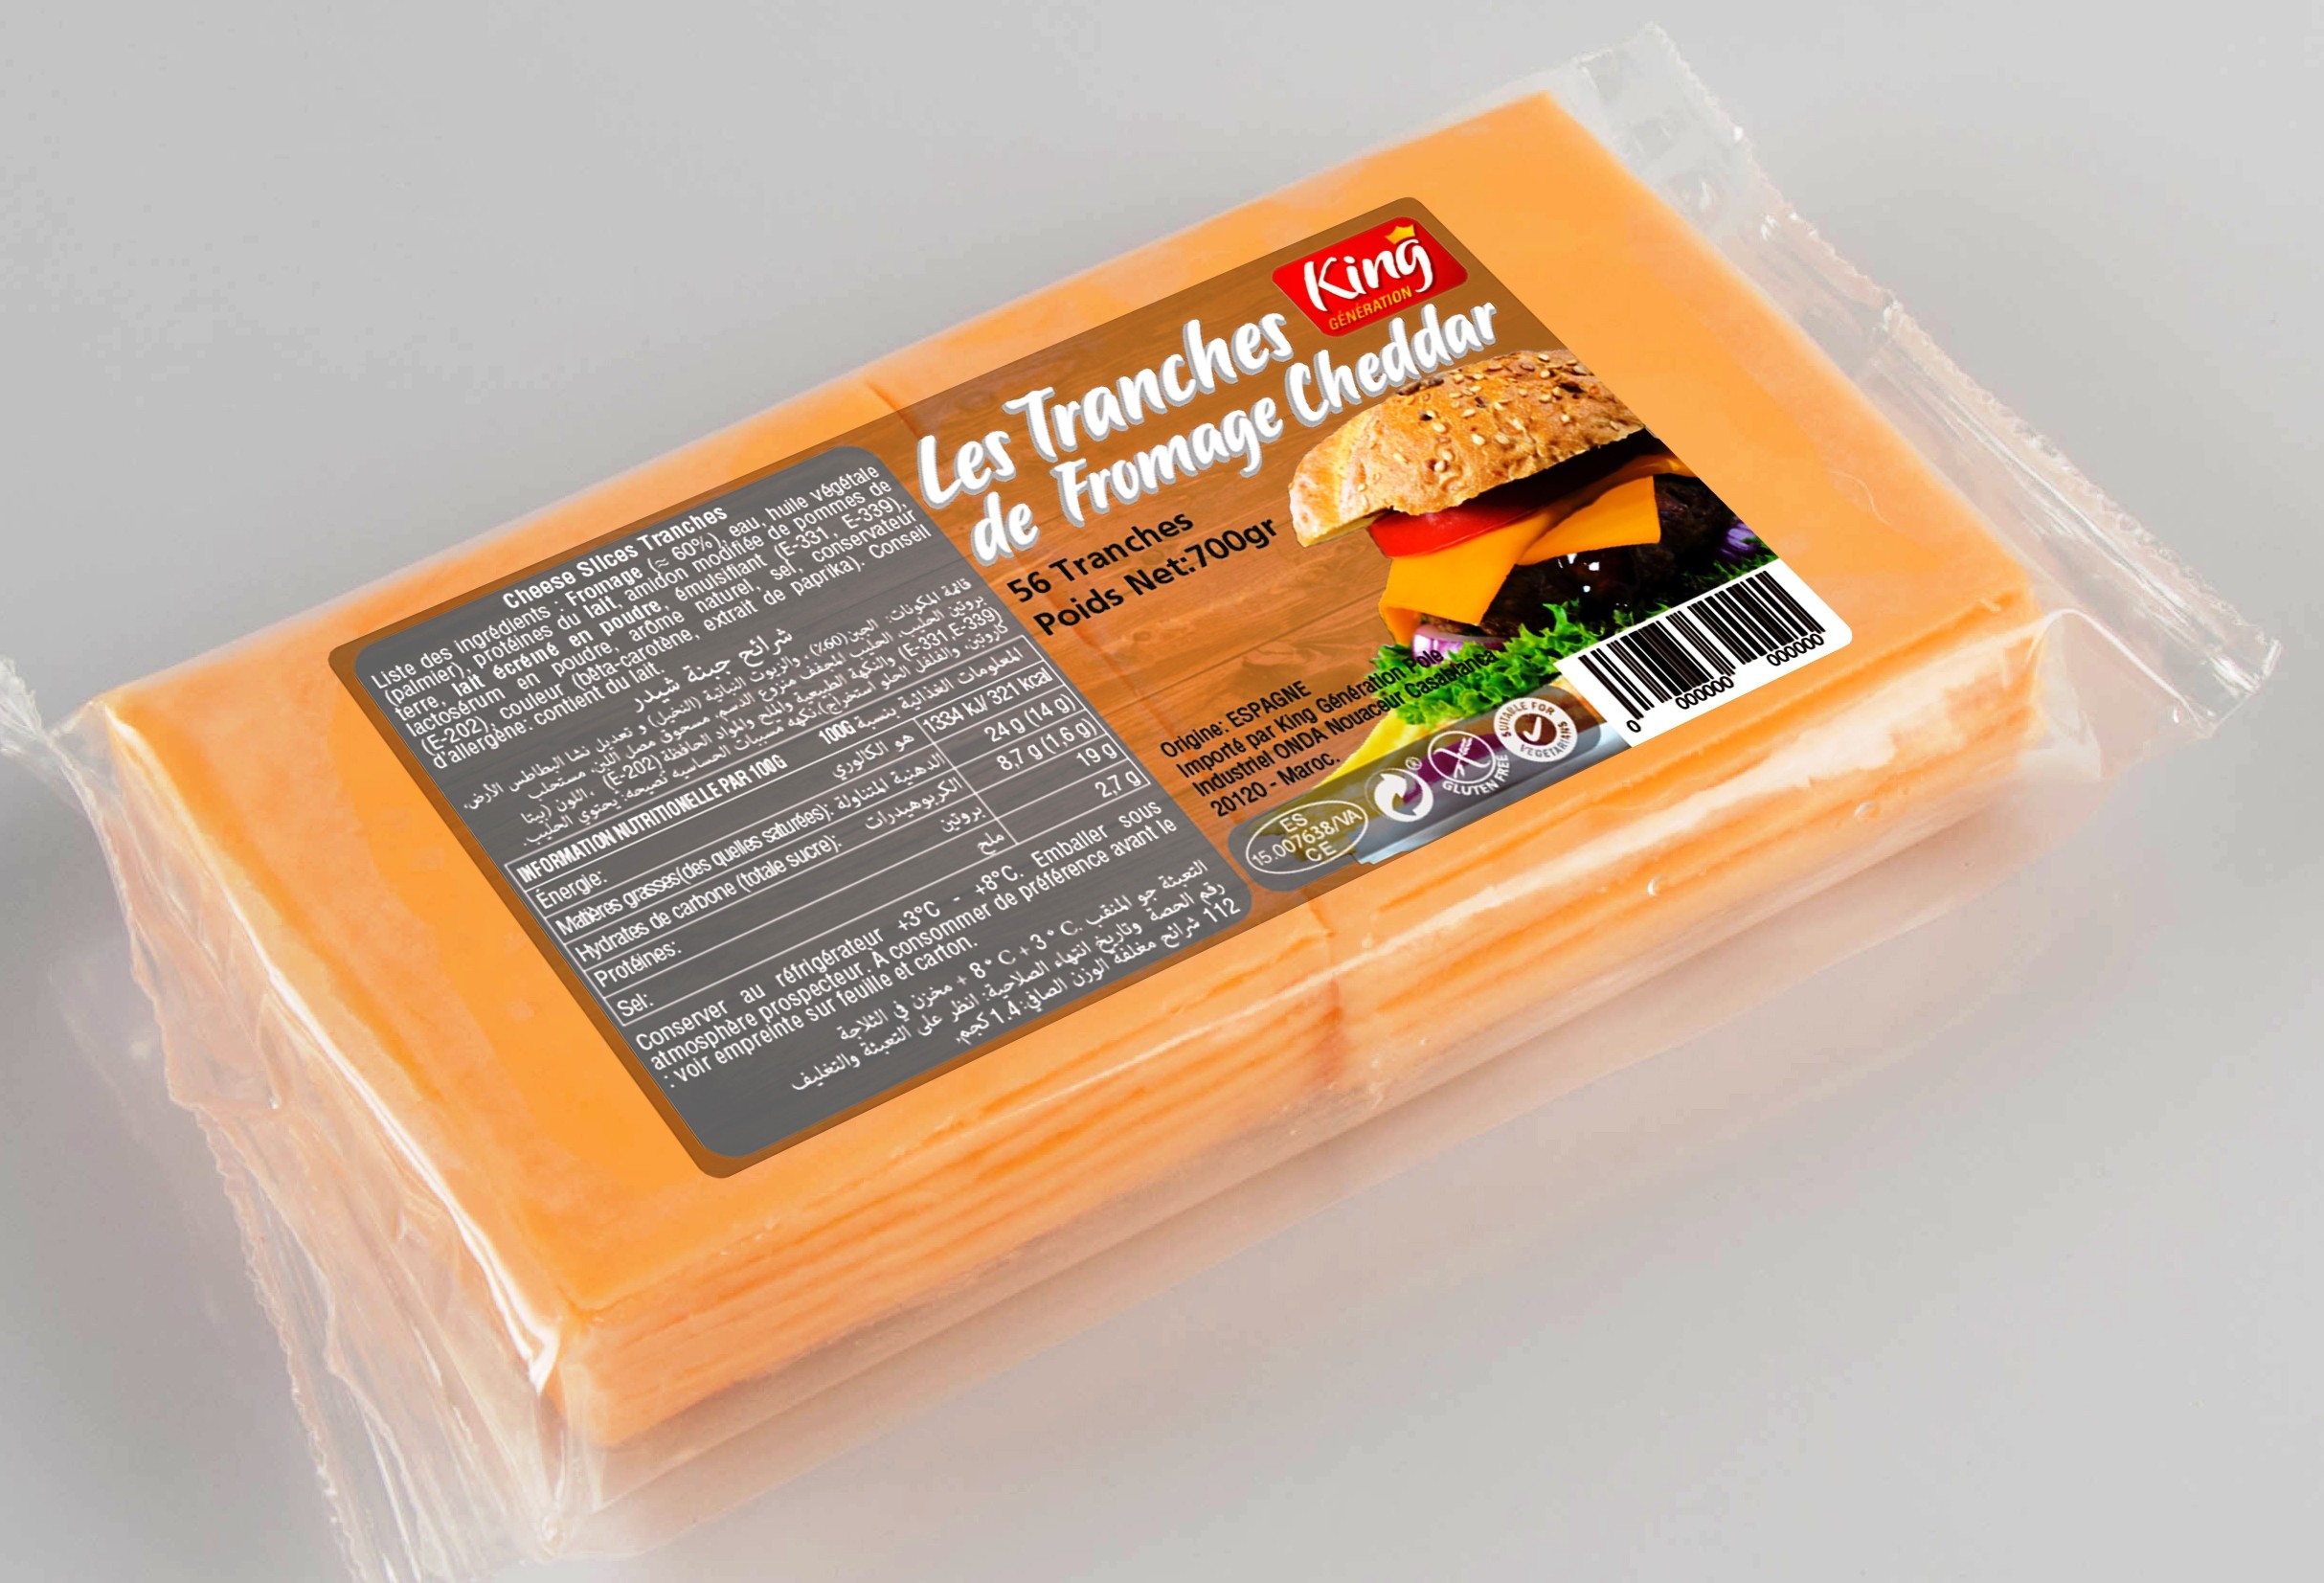 TRANCHES DE FROMAGES CHEDDAR